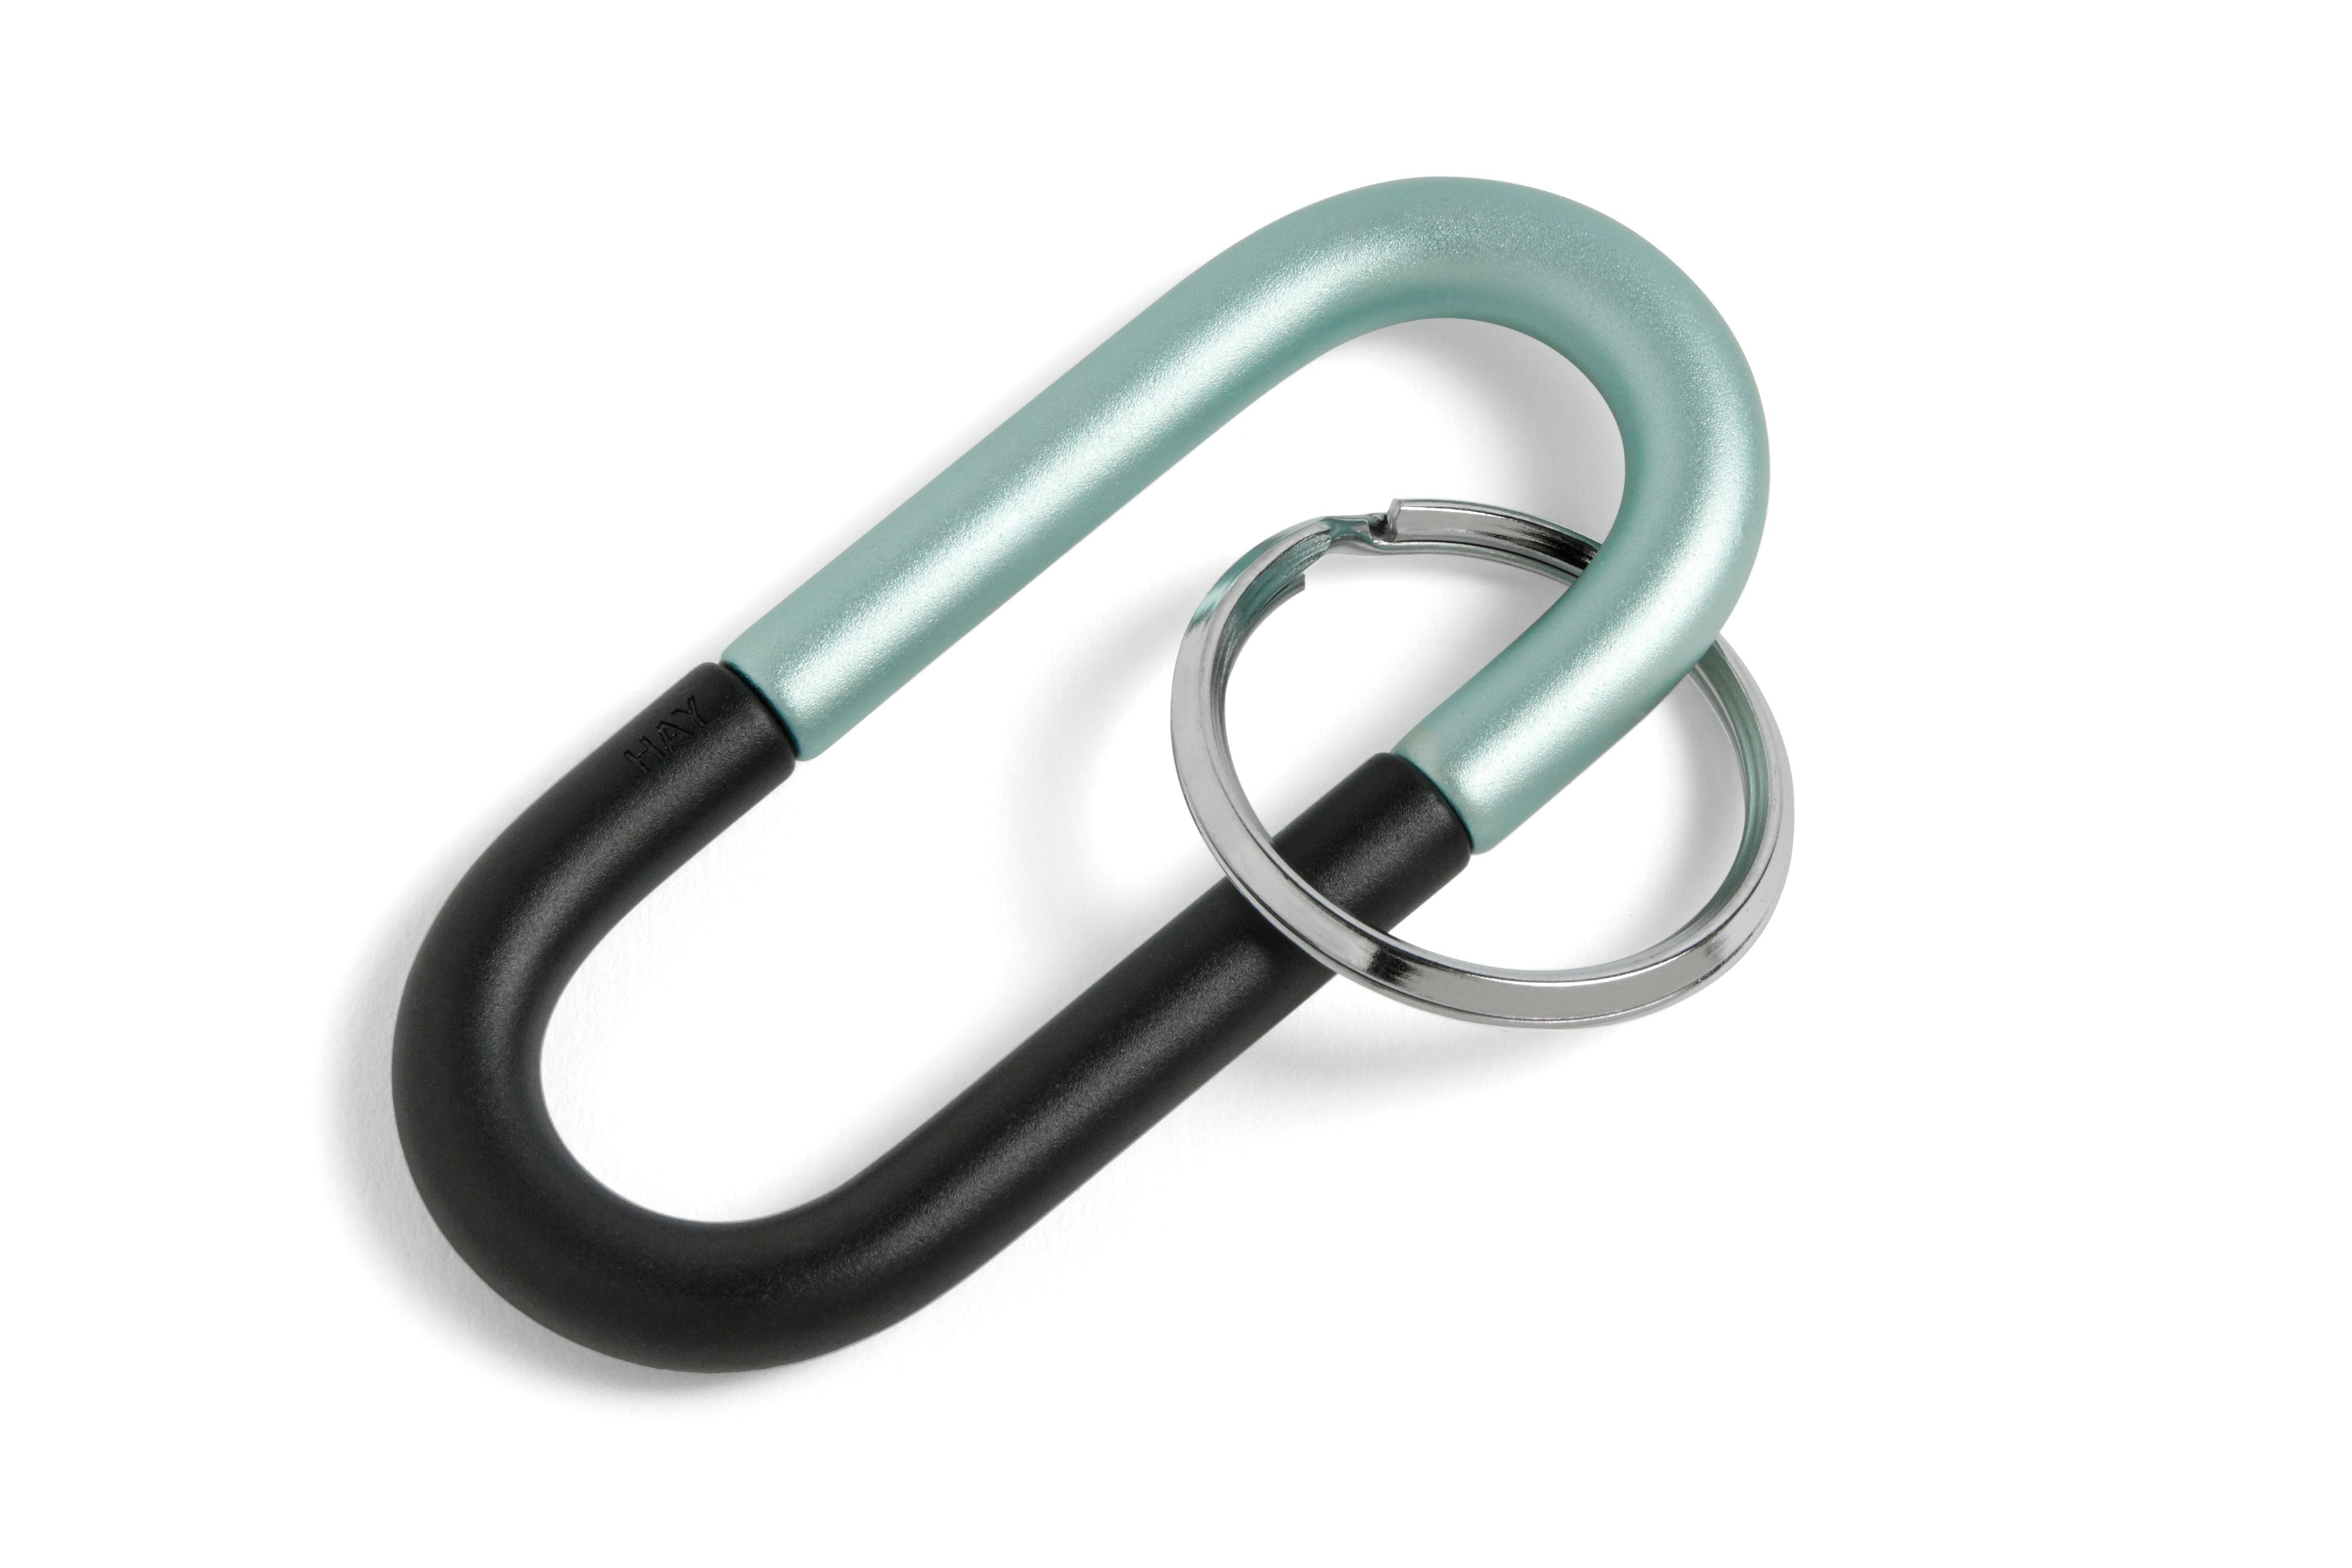 100 AVAIL FREE SHIPPING KEY CHAINS SNAP HOOK 5 NEW BLUE ALUMINUM CARABINER 